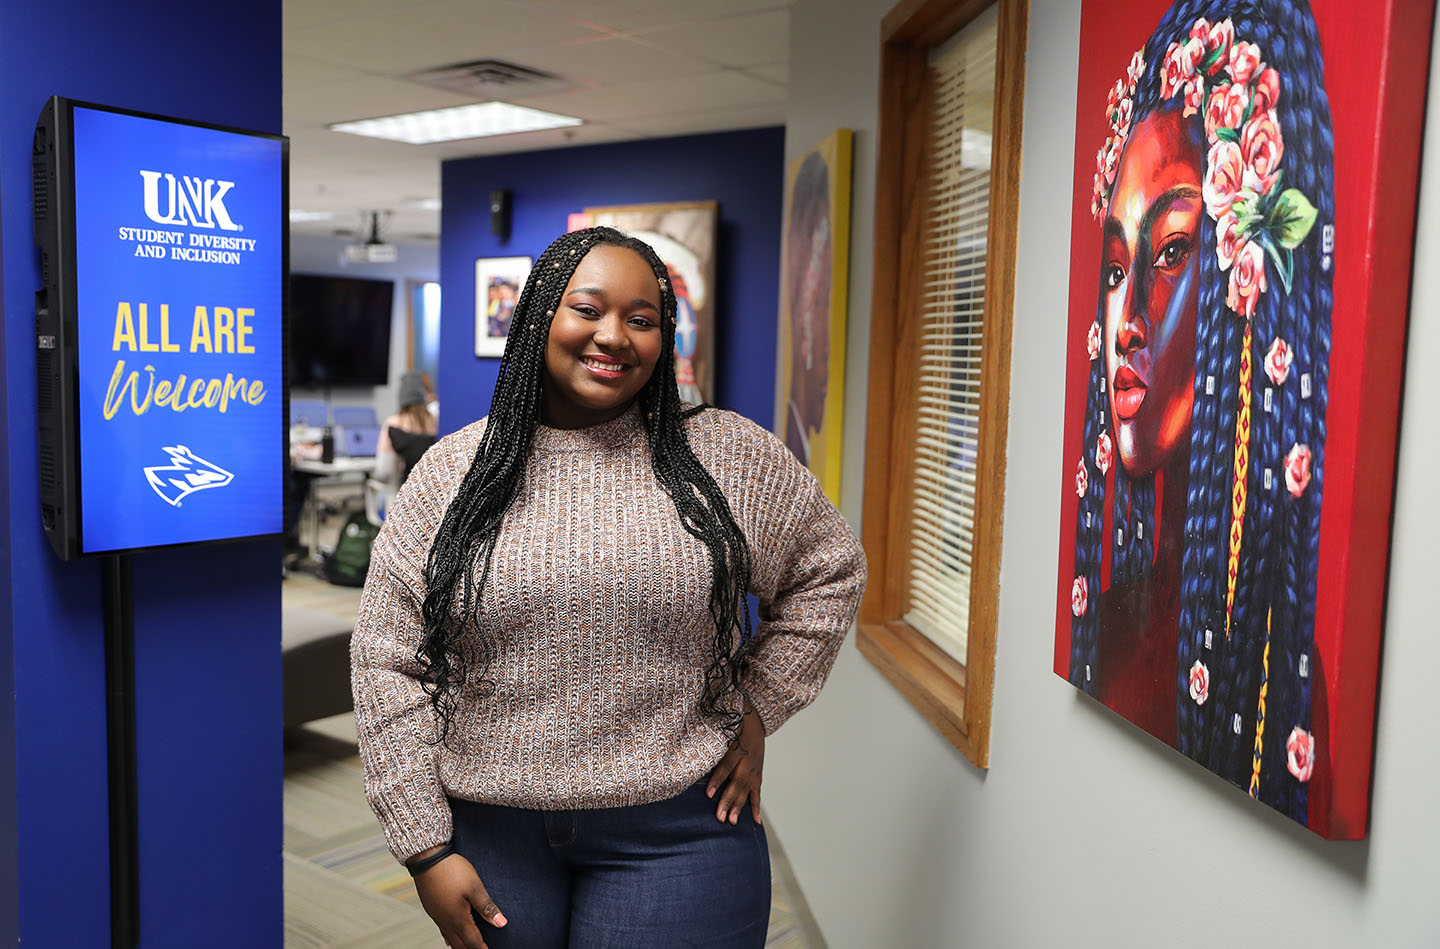 A recipient of the Diversity Service Scholarship, Esther Uma is studying social work at UNK. She serves as vice president of the Black Student Association and is part of the Student Diversity Leadership Program. (Photos by Erika Pritchard, UNK Communications)